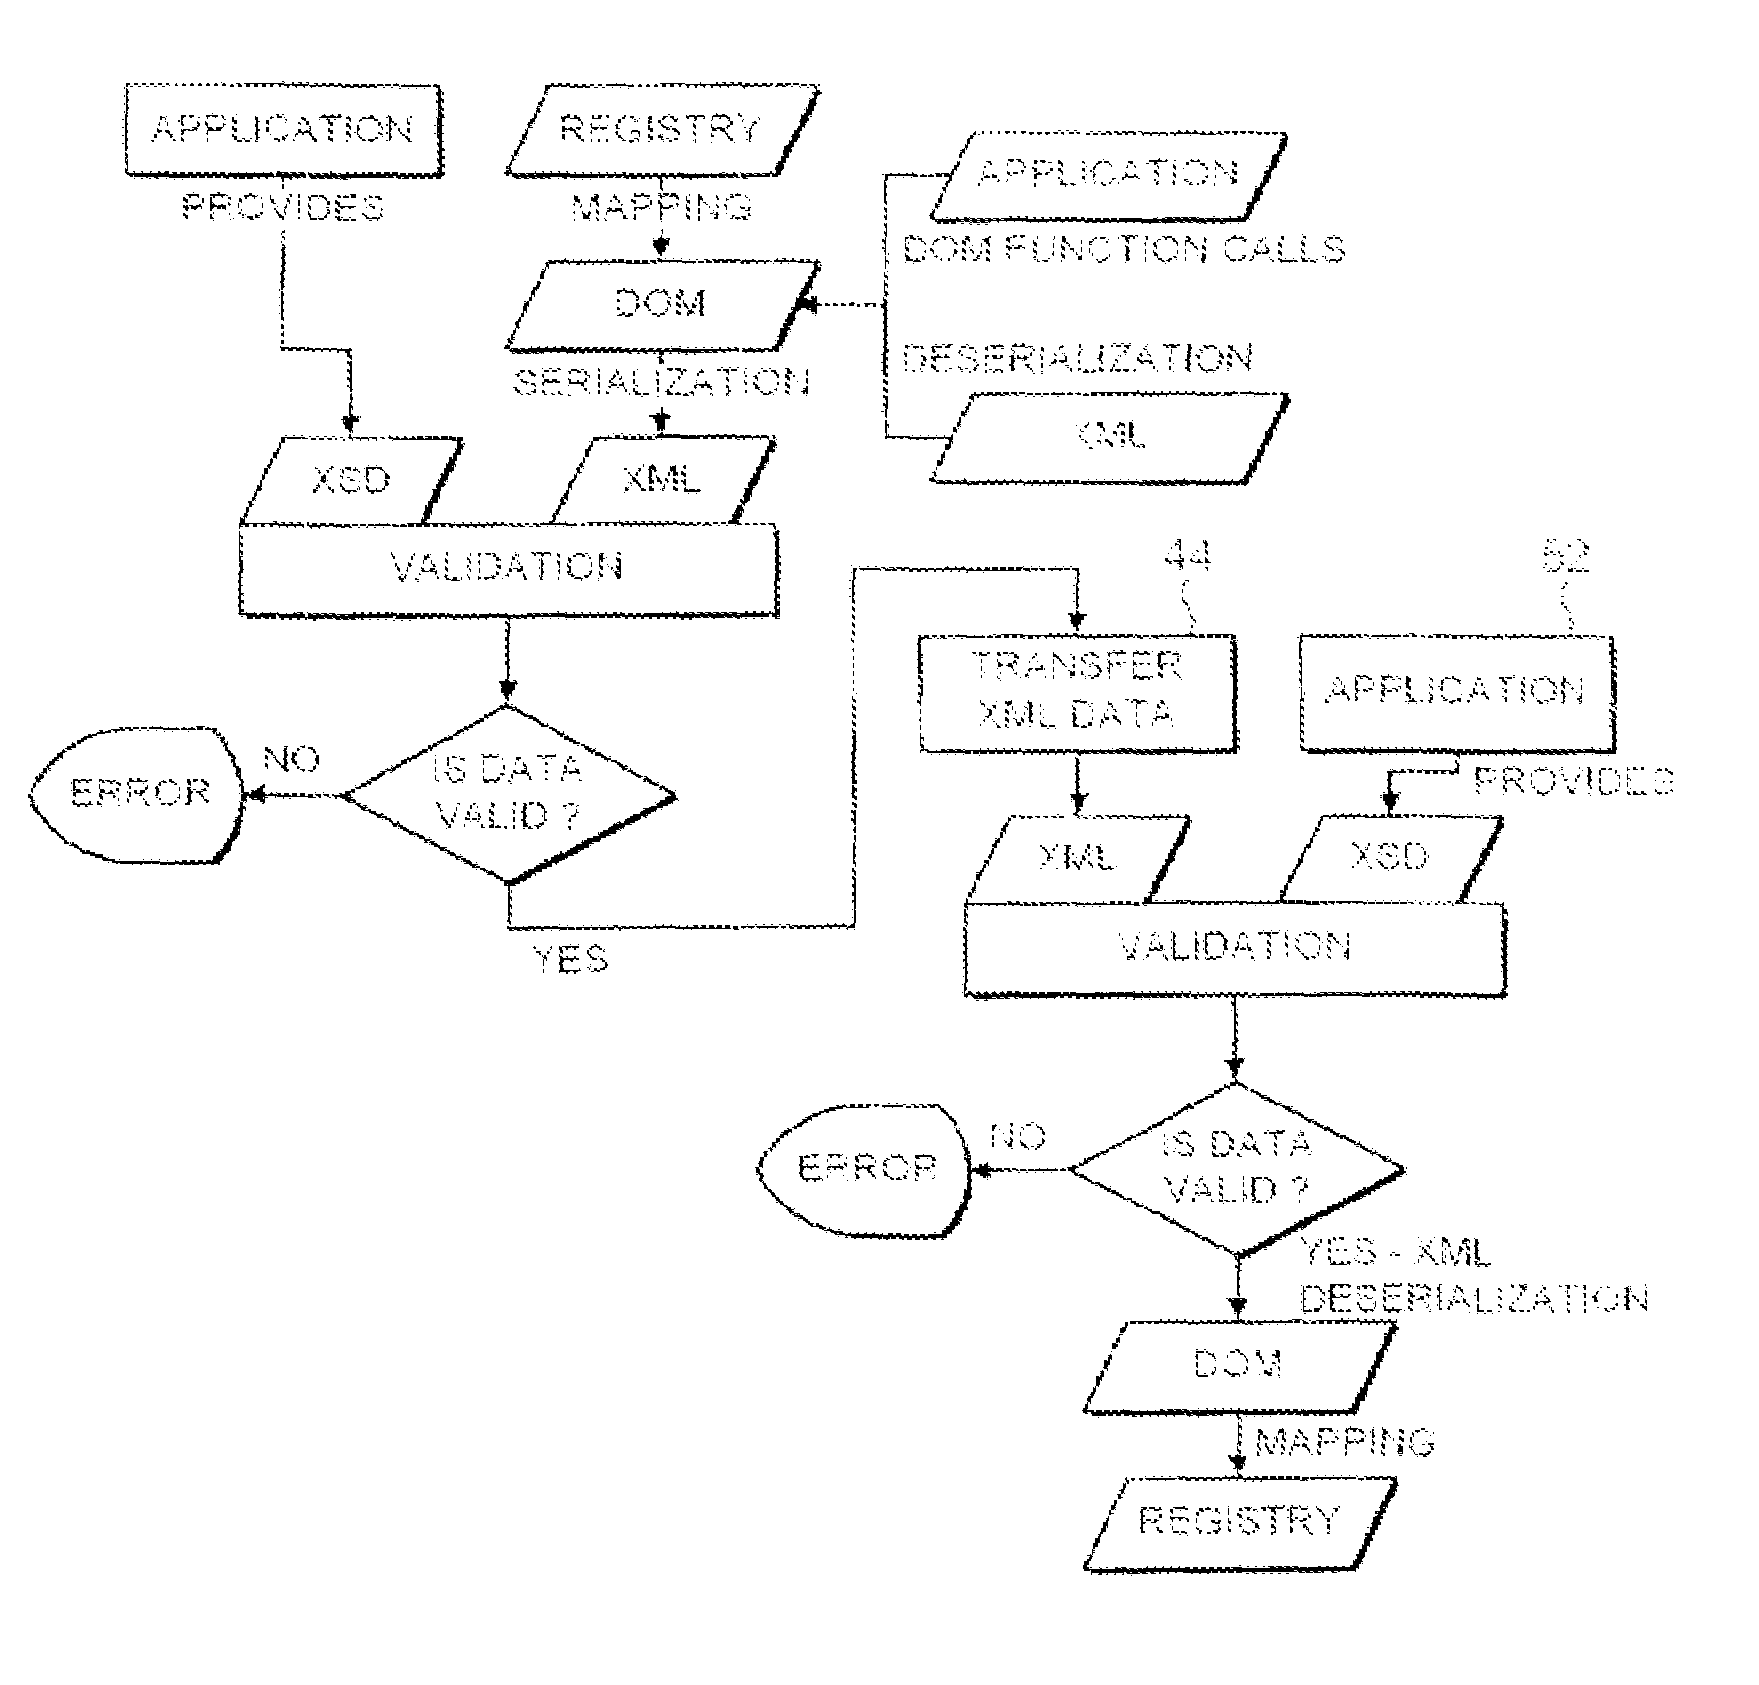 Protocol for controlling an execution process on a destination computer from a source computer